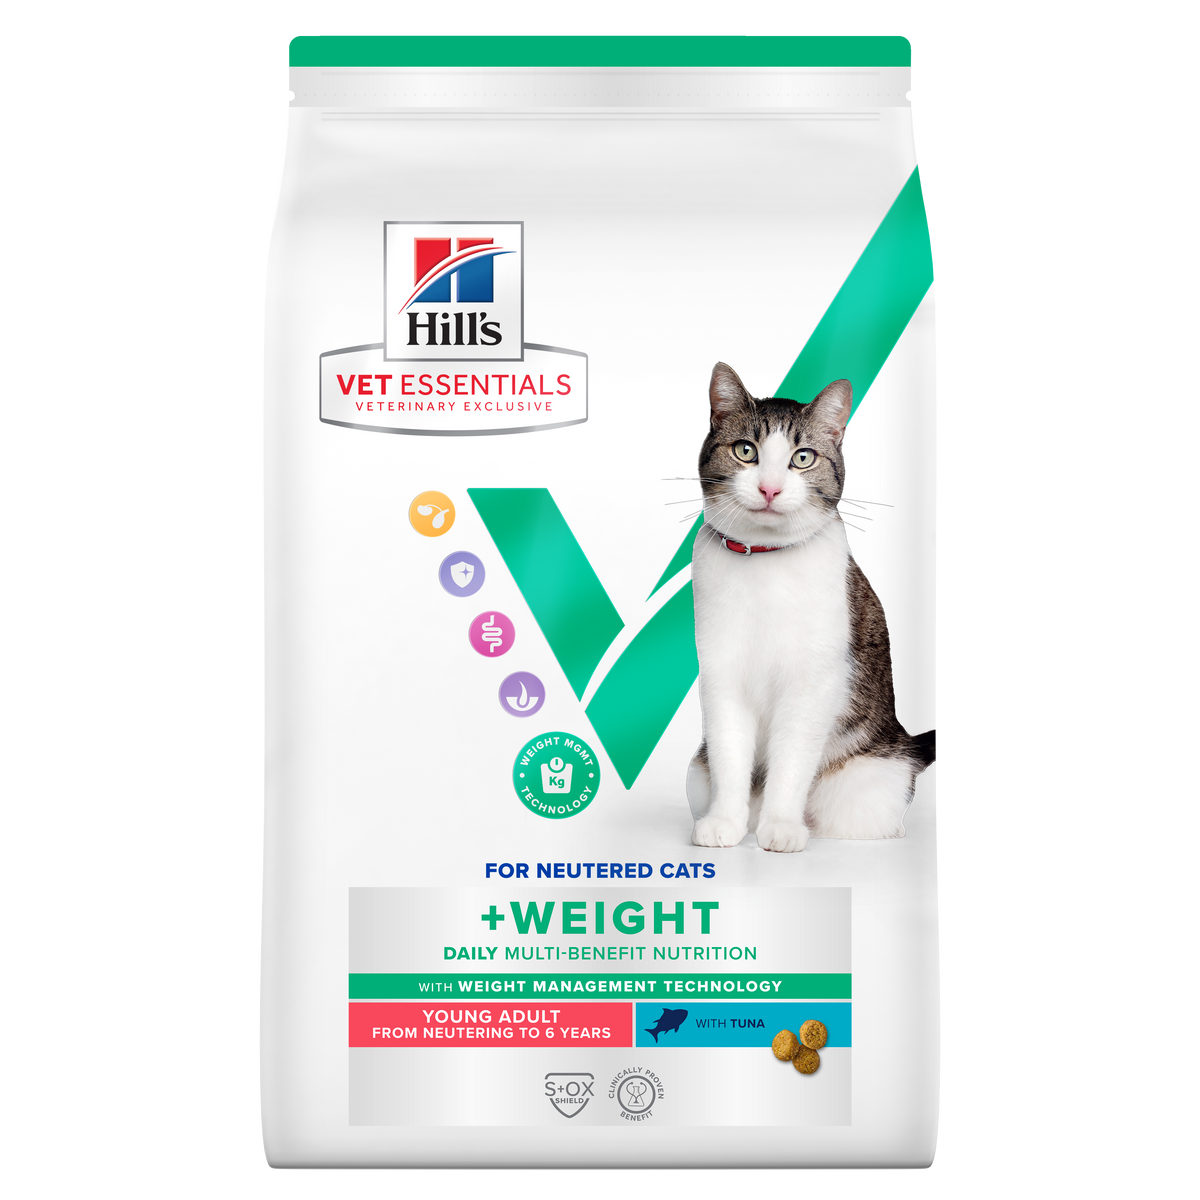 Hill's VET ESSENTIALS MULTI-BENEFIT + WEIGHT Young Adult Dry Cat Food with Tuna